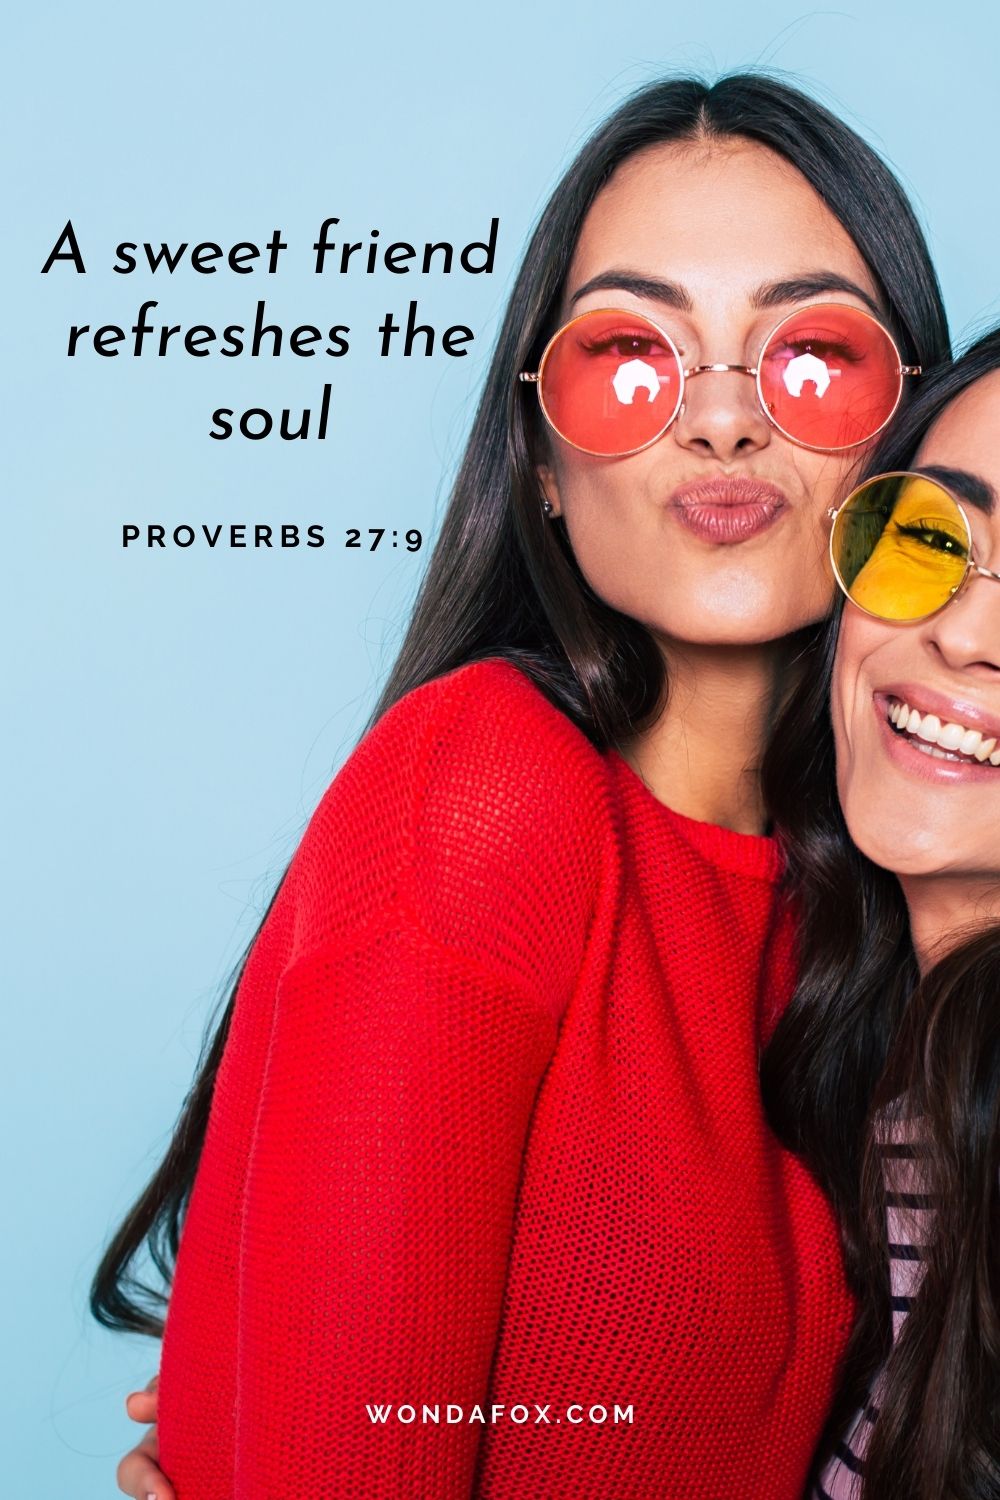 A sweet friend refreshes the soul